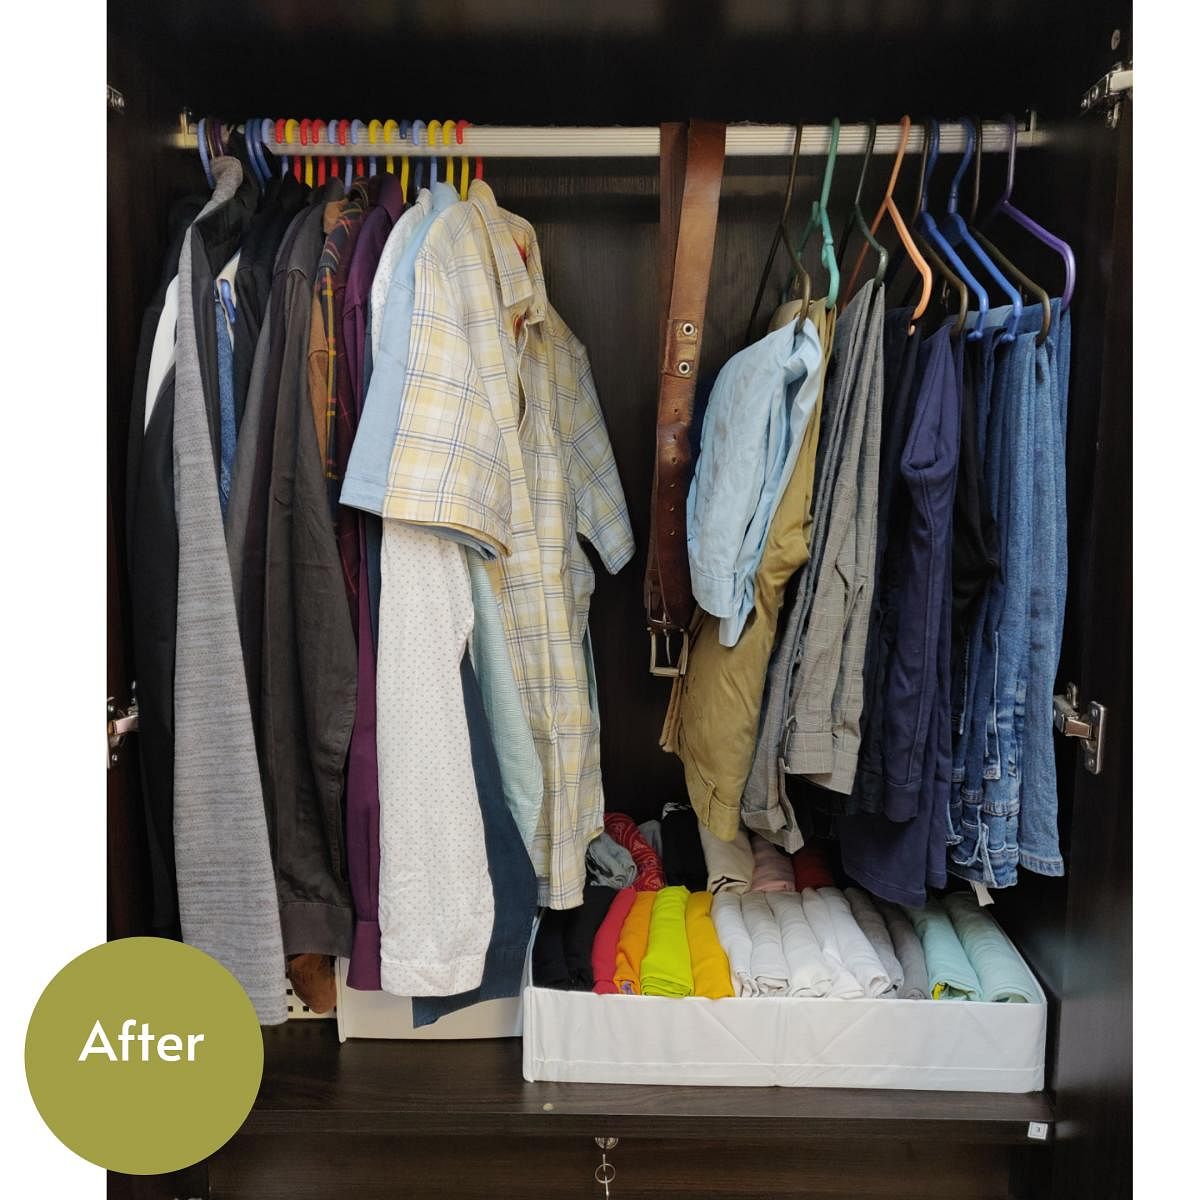 Decluttering not only involves removing unnecessary items, but also finding an organisational system that will prevent future clutter.